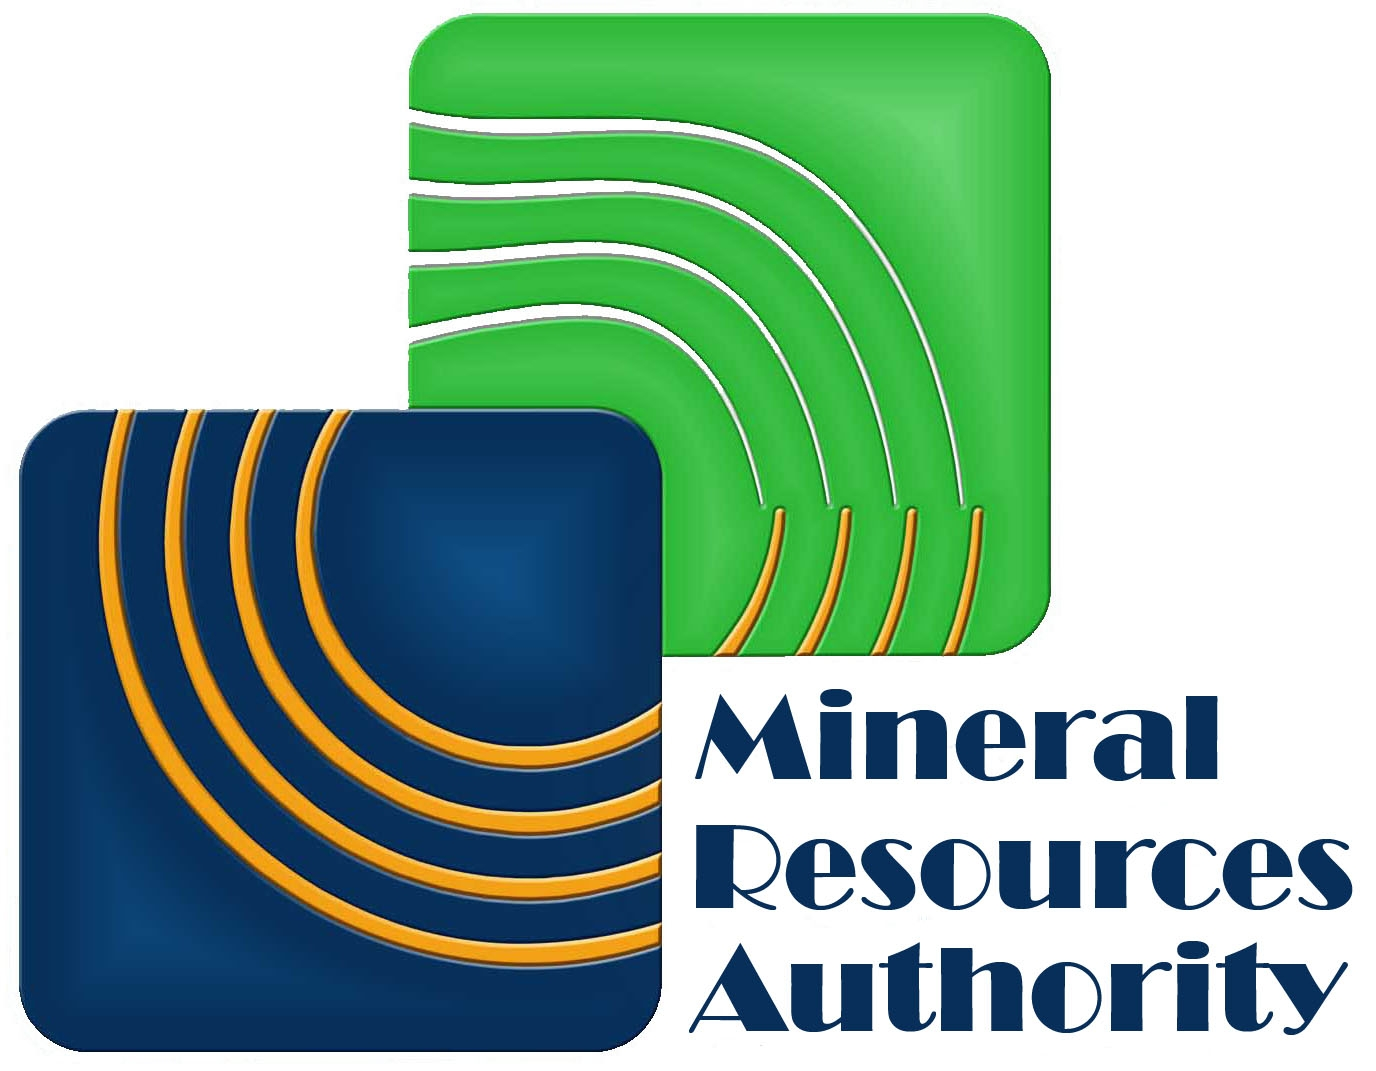 MINERAL RESOURCES AUTHORITY